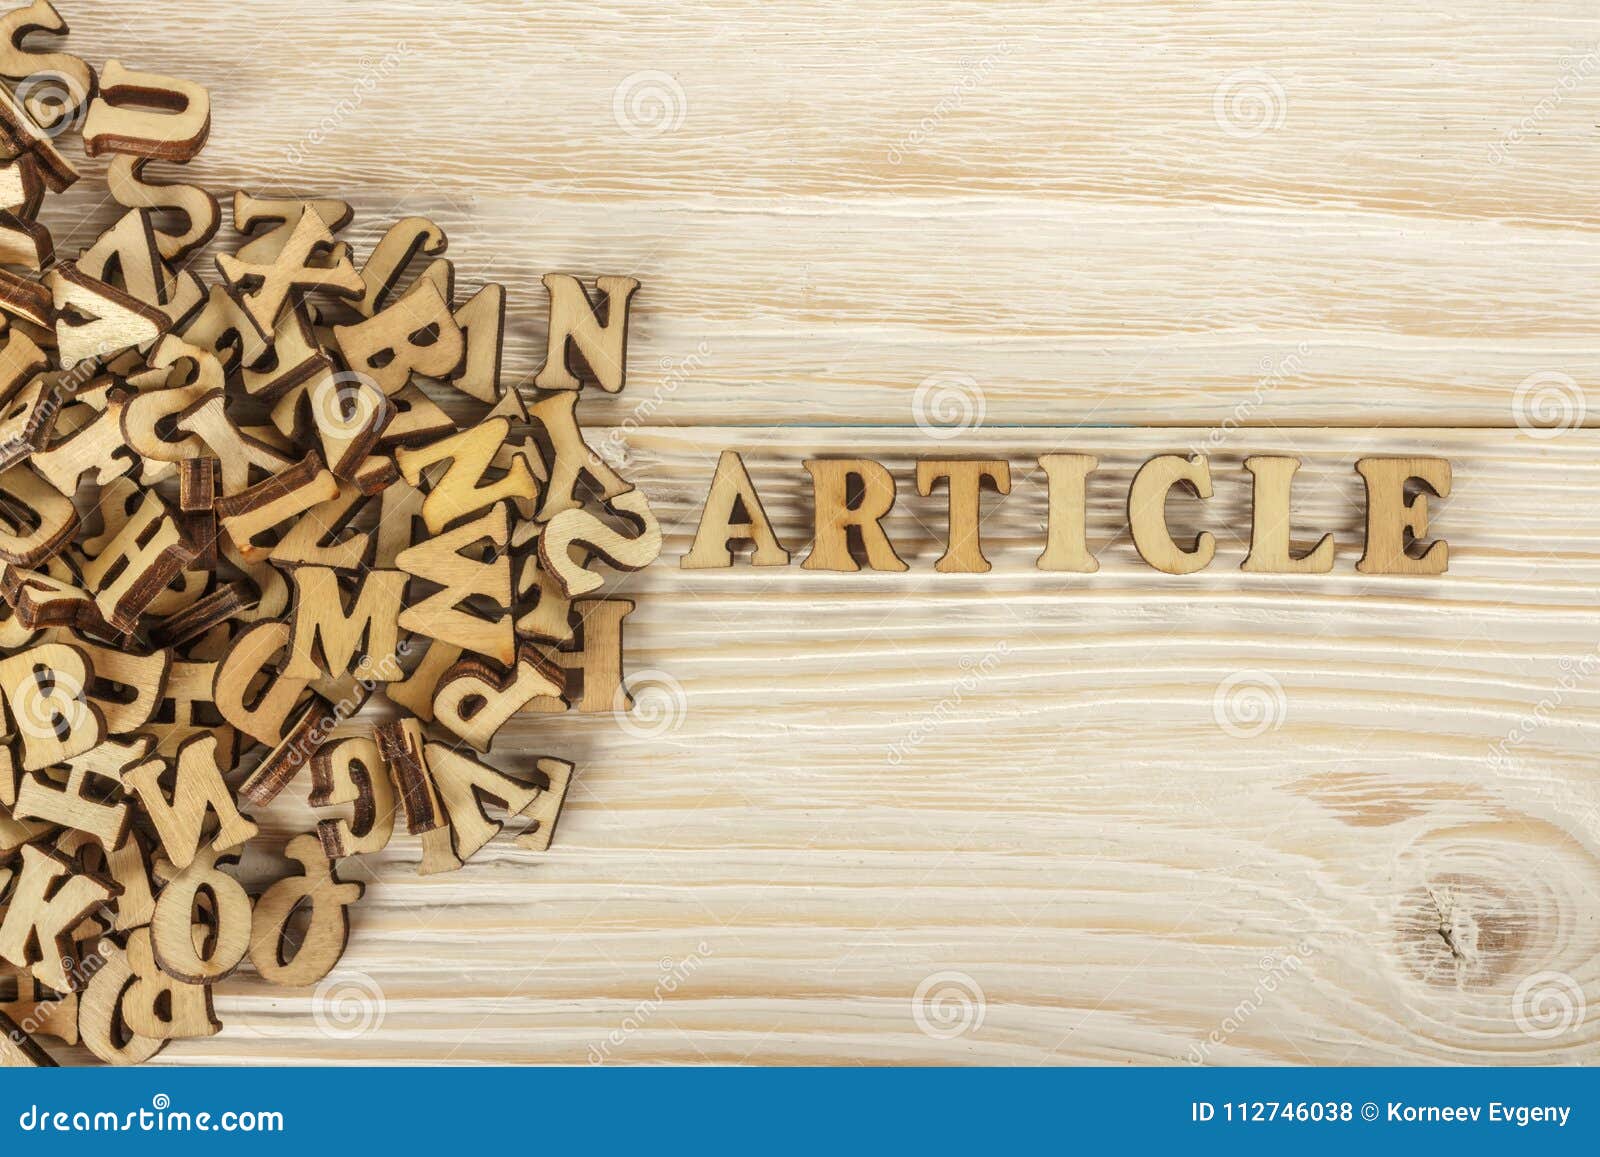 Writing Articles. from the Pile of Letters To Create the Text for the  Press. Wooden Letters on a Wooden Background. the View from Stock Photo -  Image of background, letters: 112746038